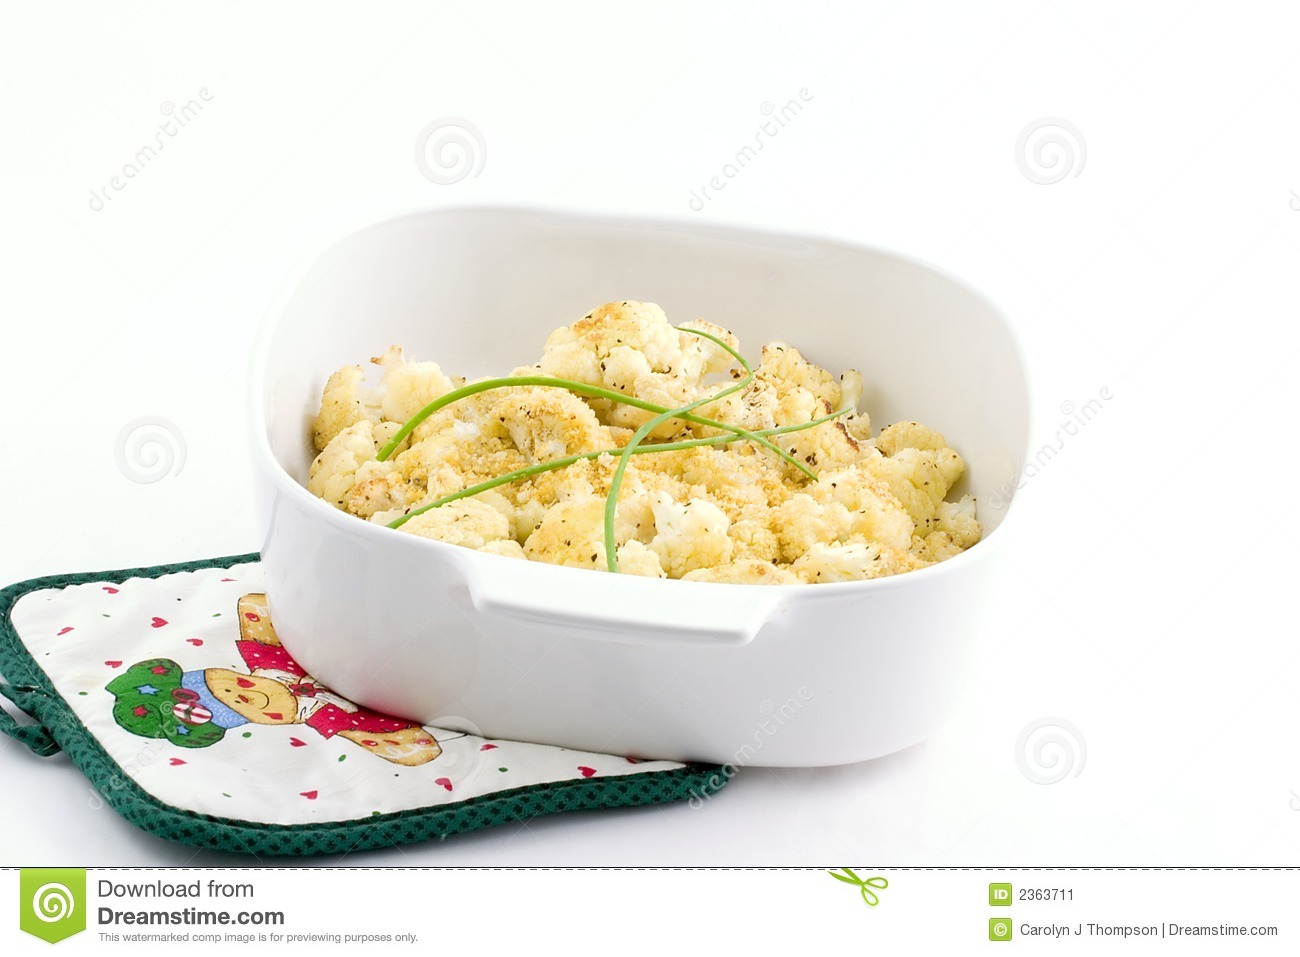 And Cheese Croutons Garnished With Chives Are A Great Side Dish